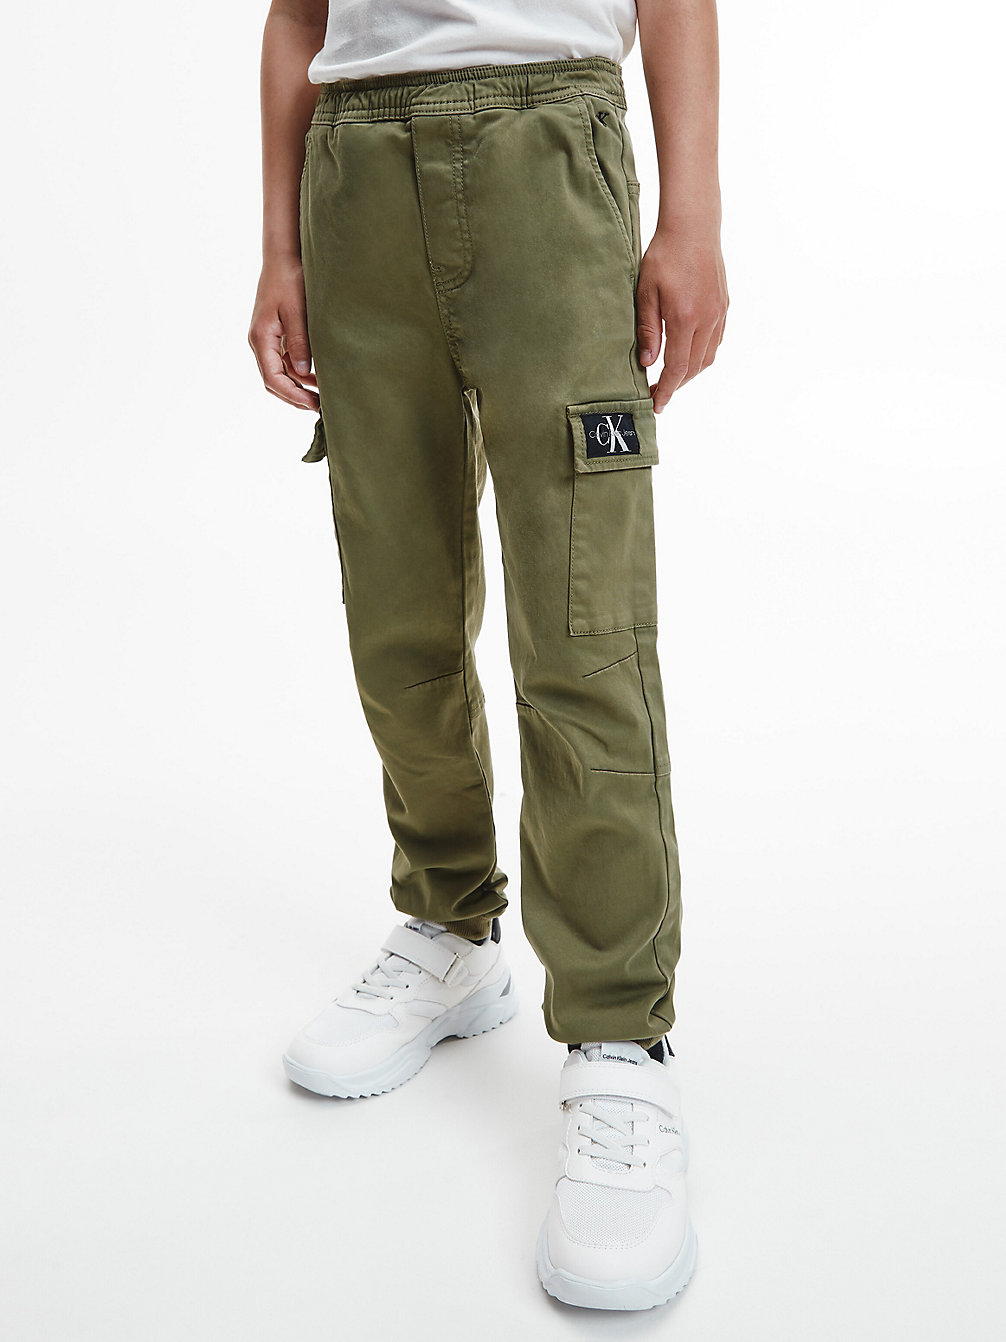 BURNT OLIVE Cargo Trousers undefined boys Calvin Klein